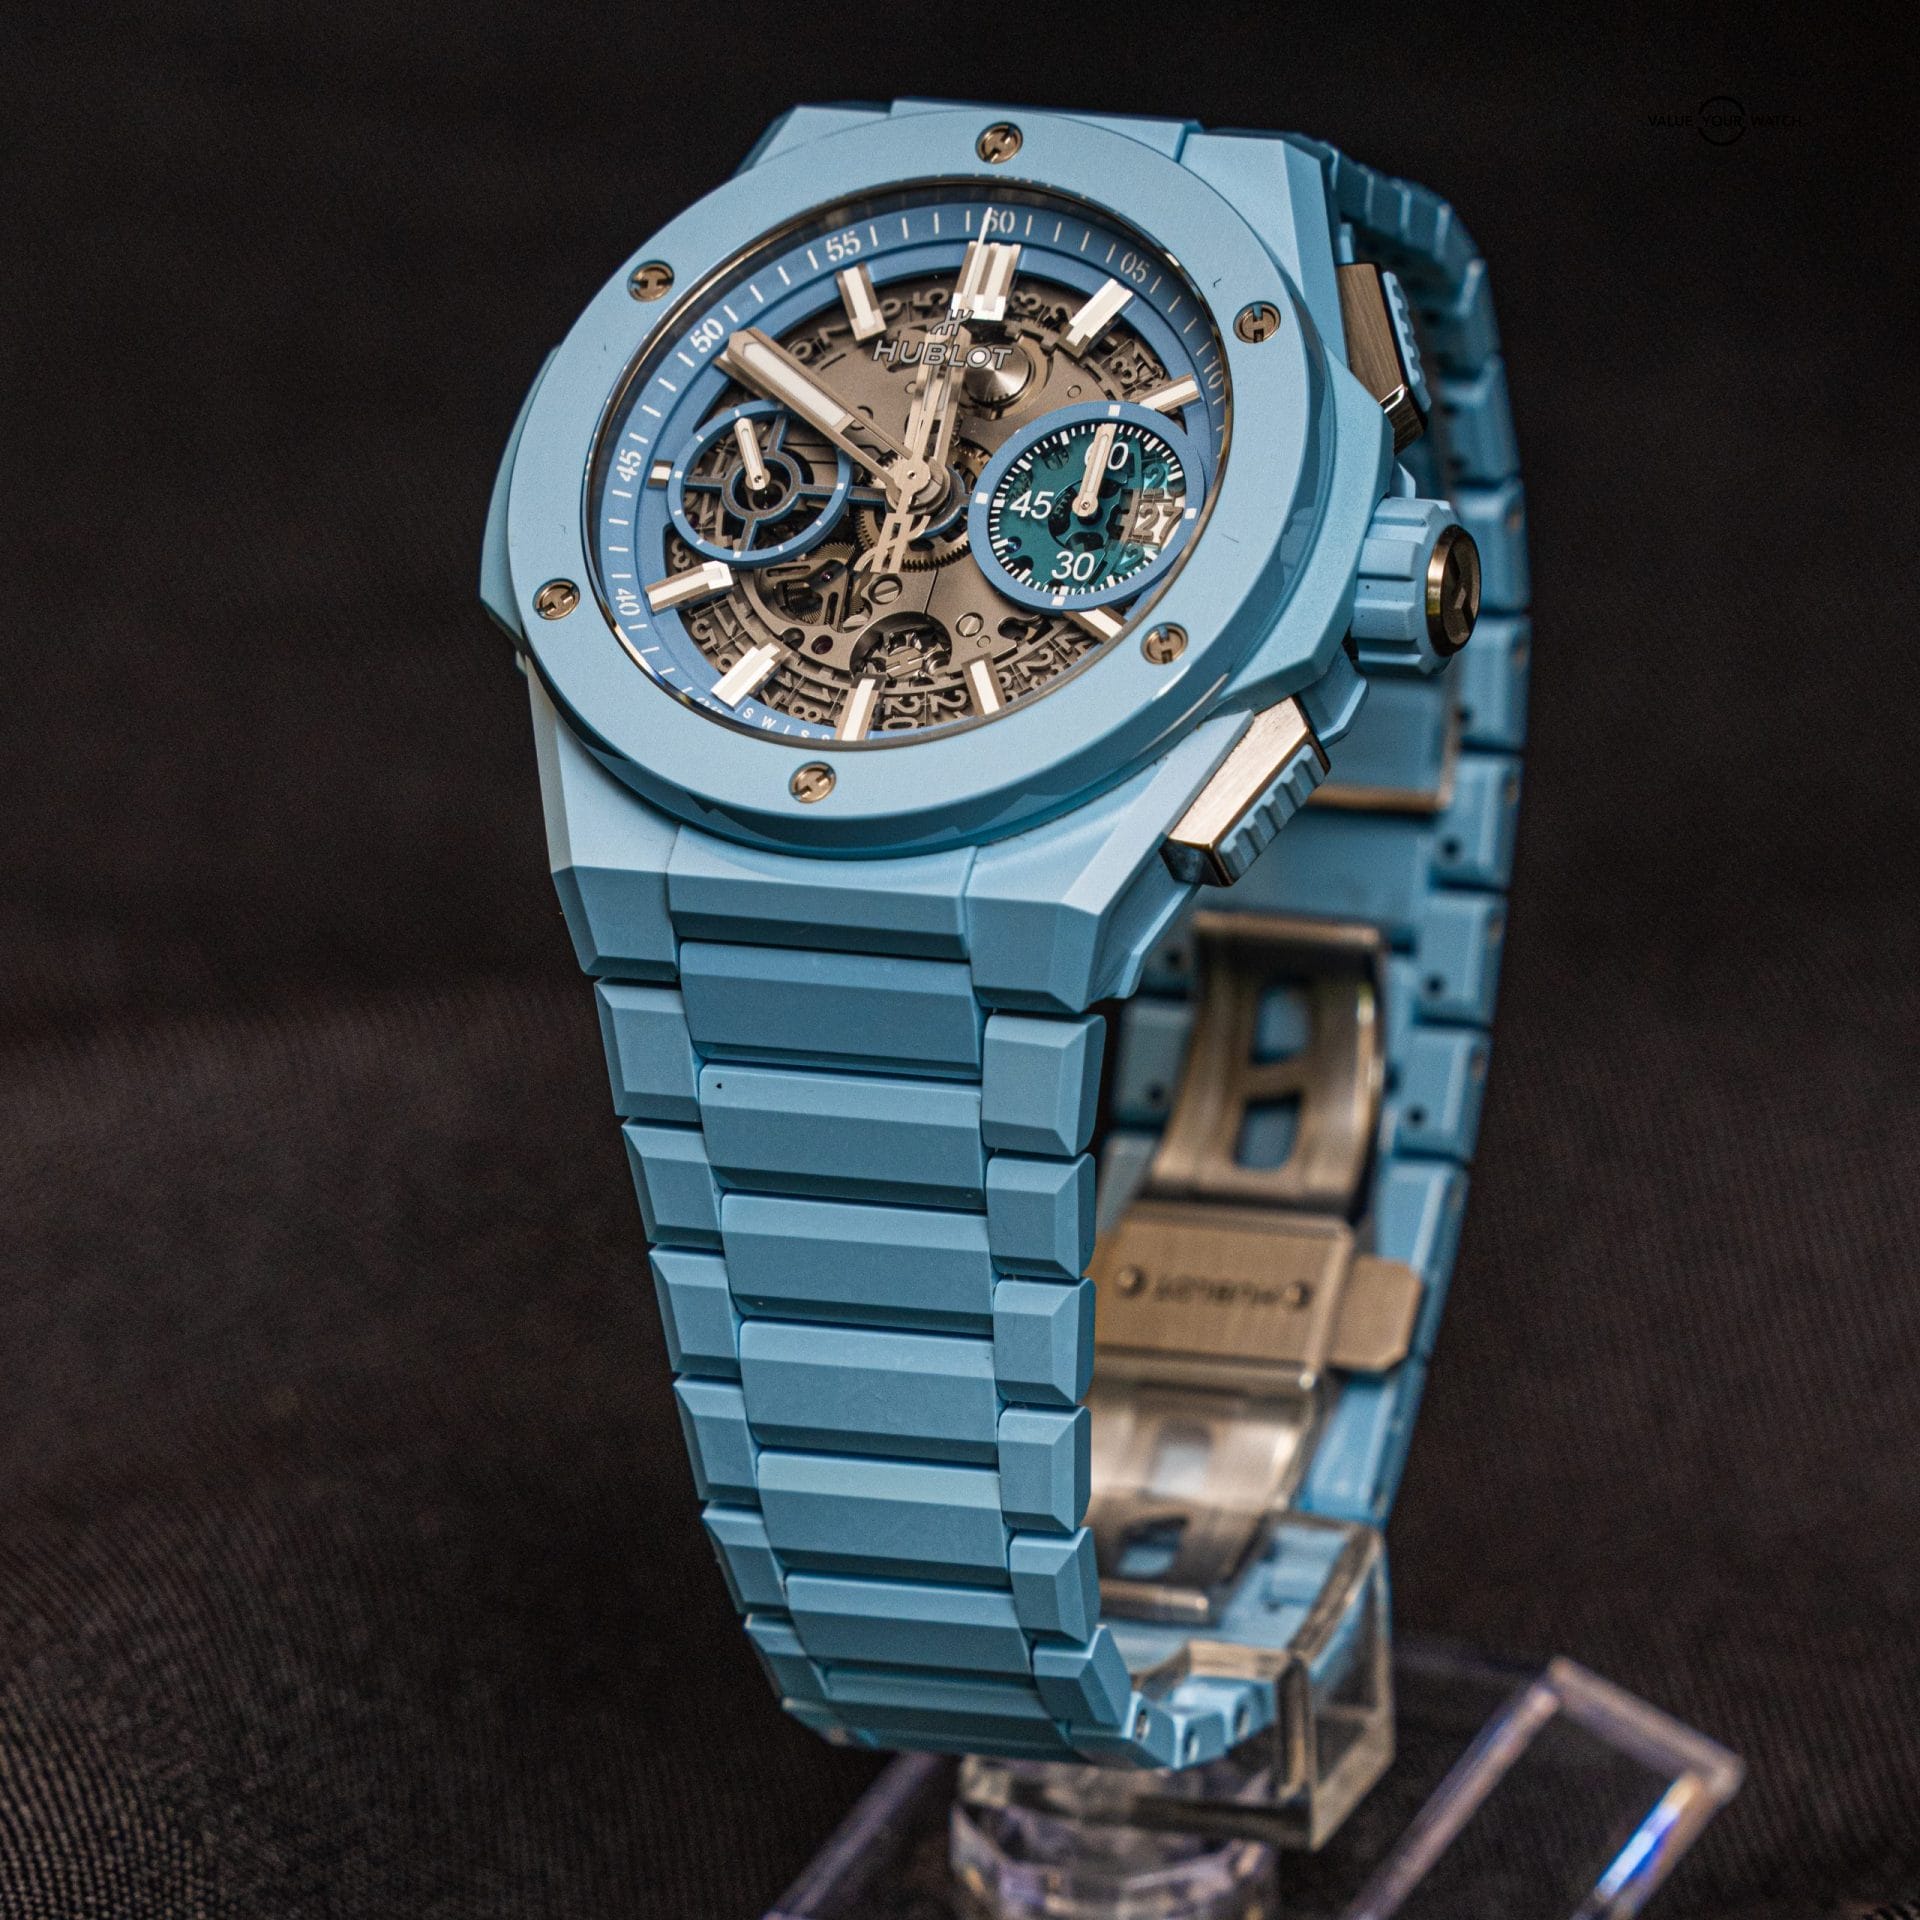 Audemars Piguet Royal Oak Foundation Time For The Trees... for $55,572 for  sale from a Private Seller on Chrono24